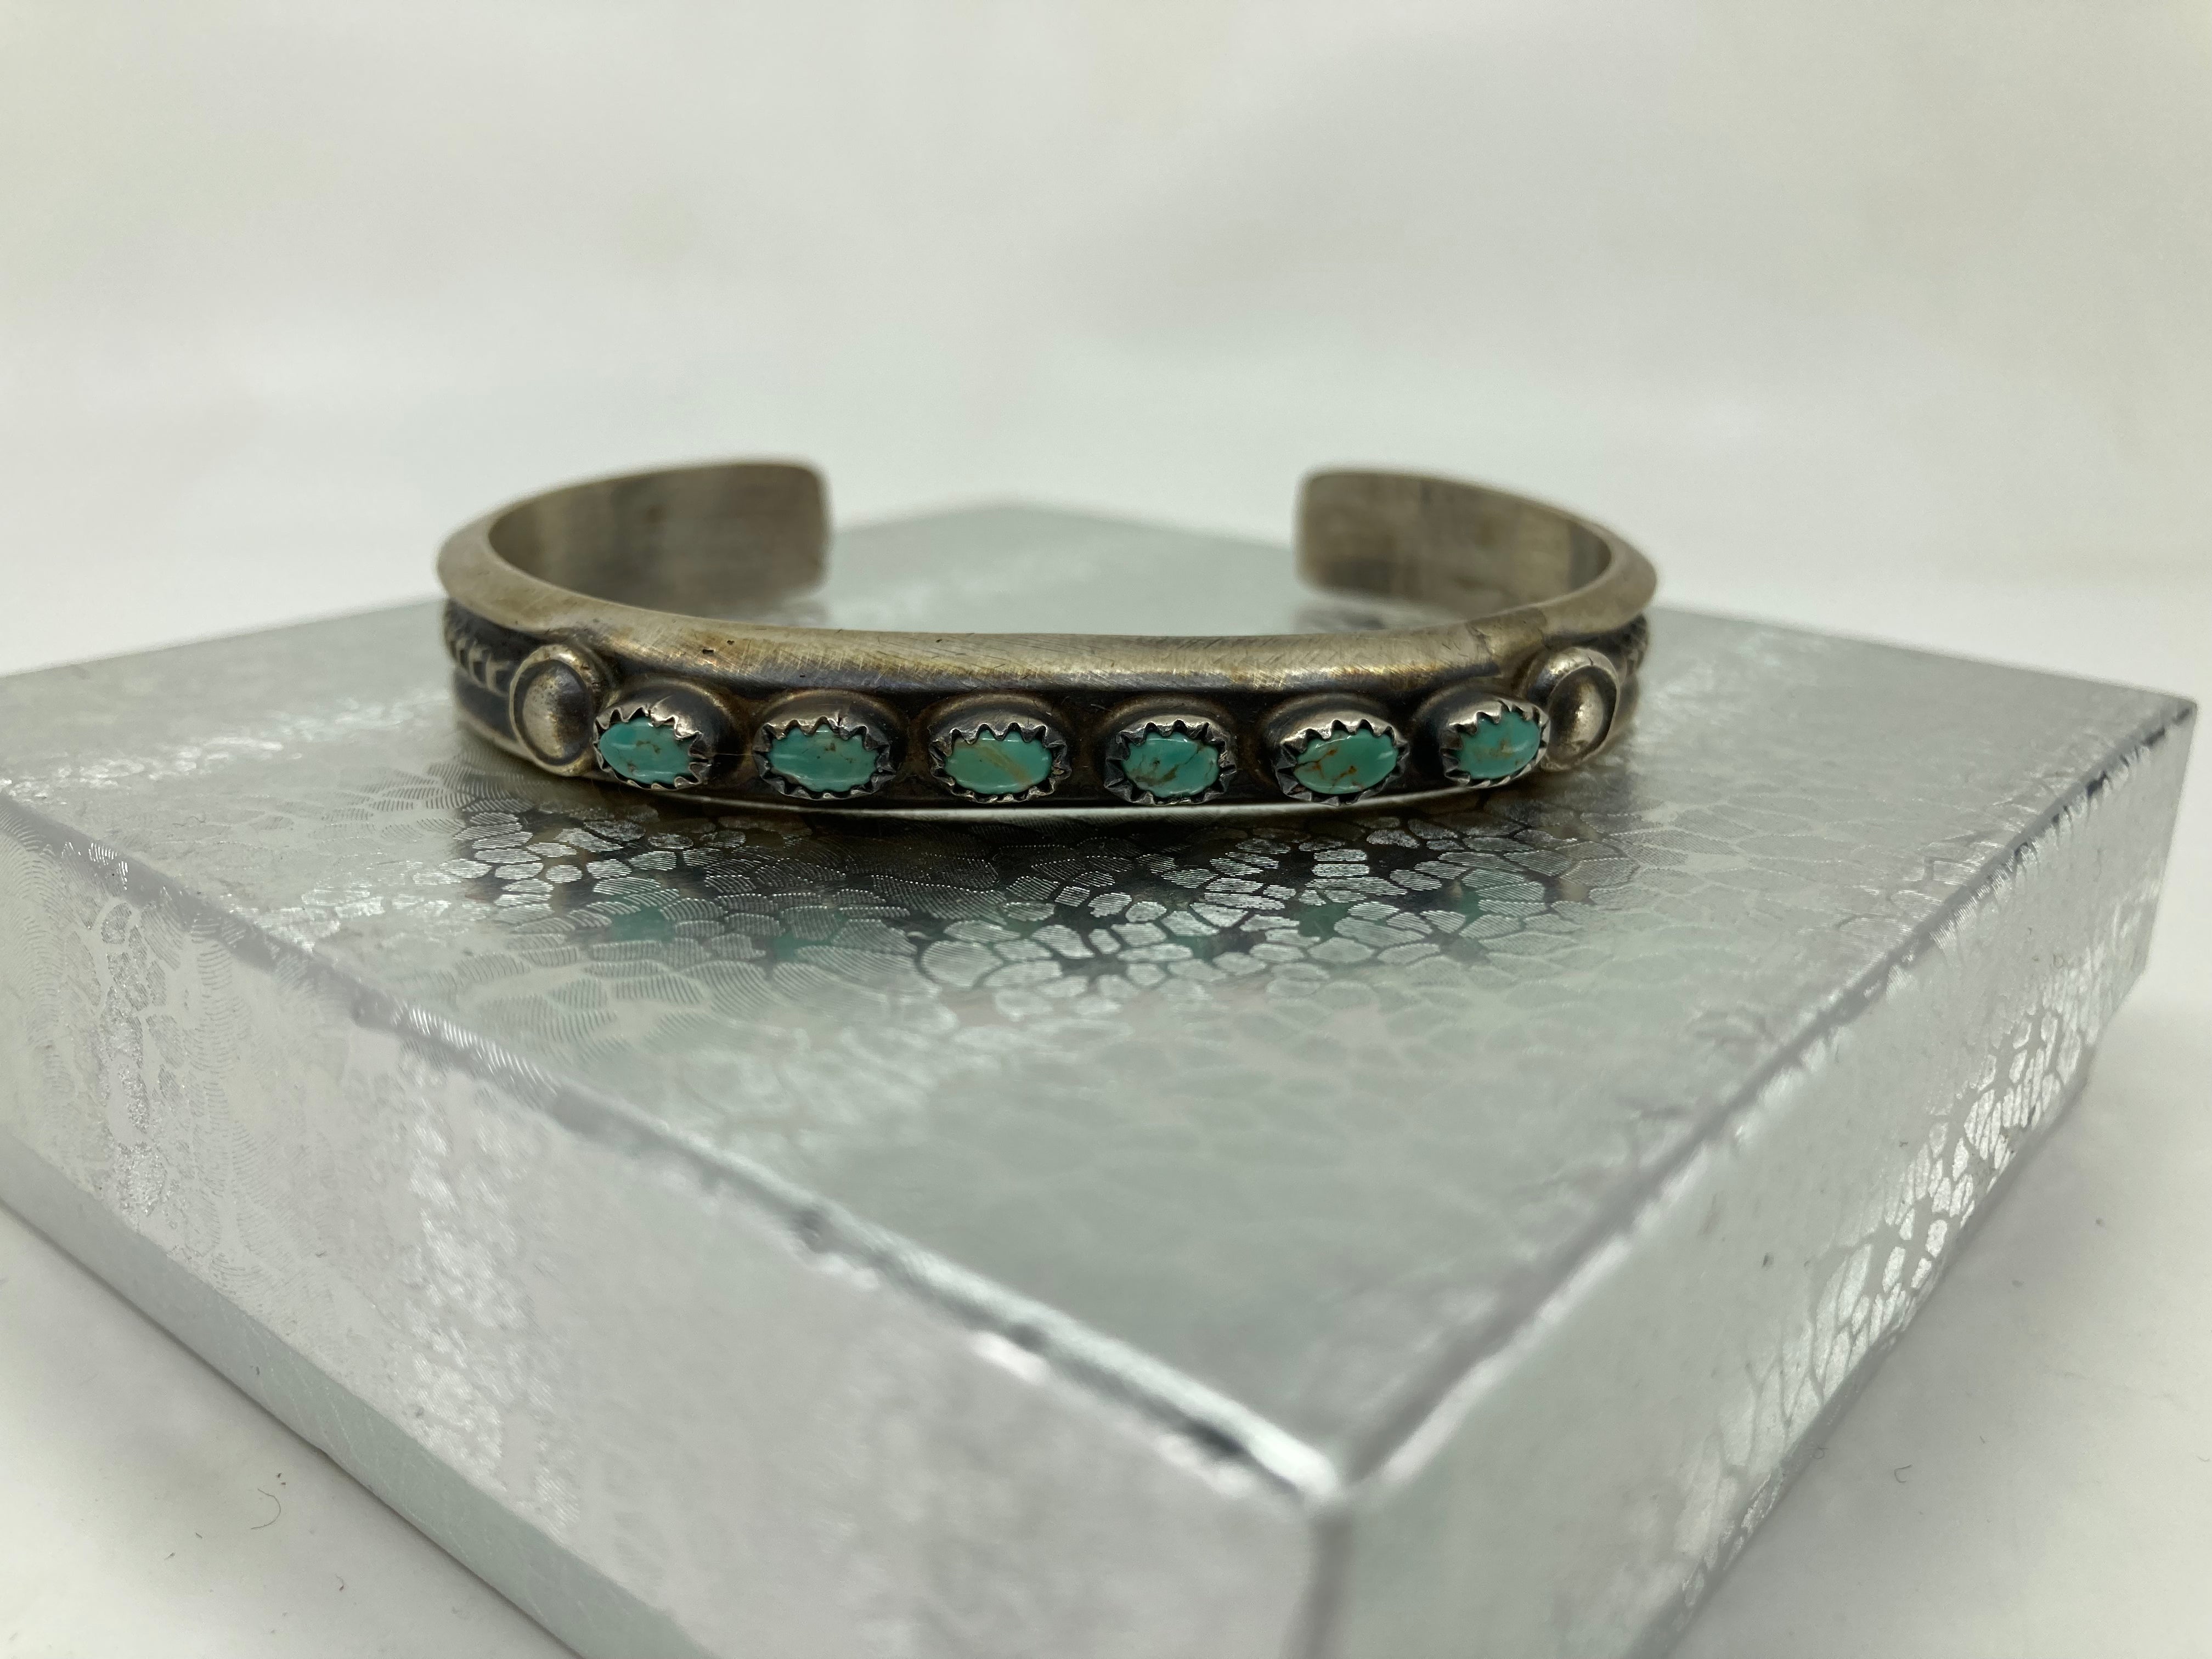 Handmade Sterling Silver and Turquoise Cuff Bracelet PSTPC09